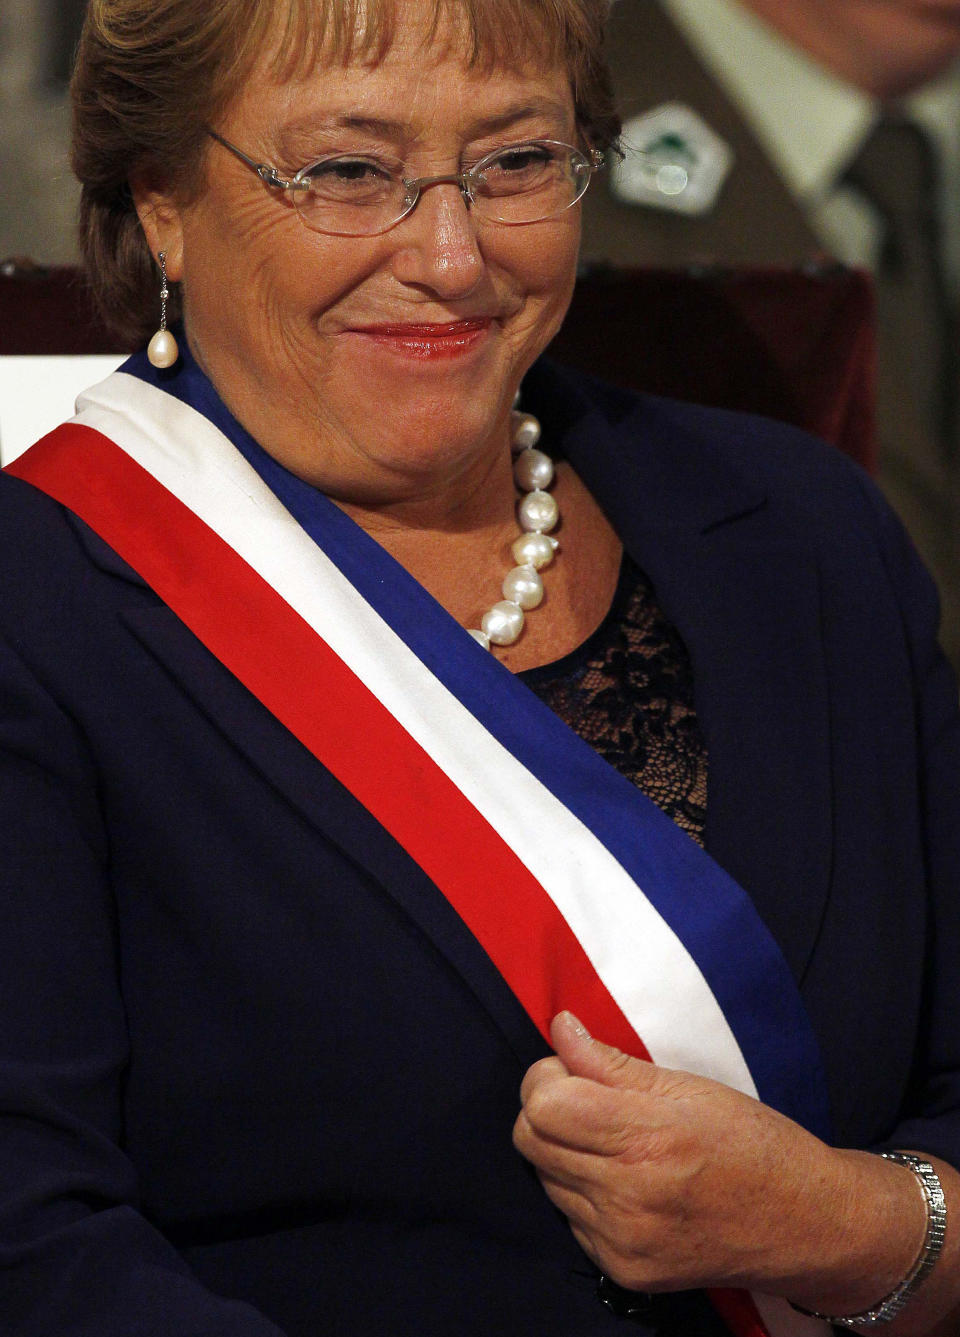 Chile's new President Michelle Bachelet adjusts her presidential sash during a religious ceremony in Santiago, Chile, Wednesday, March 12, 2014. Bachelet, who led Chile from 2006-2010, was sworn-in as president on Tuesday. (AP Photo/Luis Hidalgo)